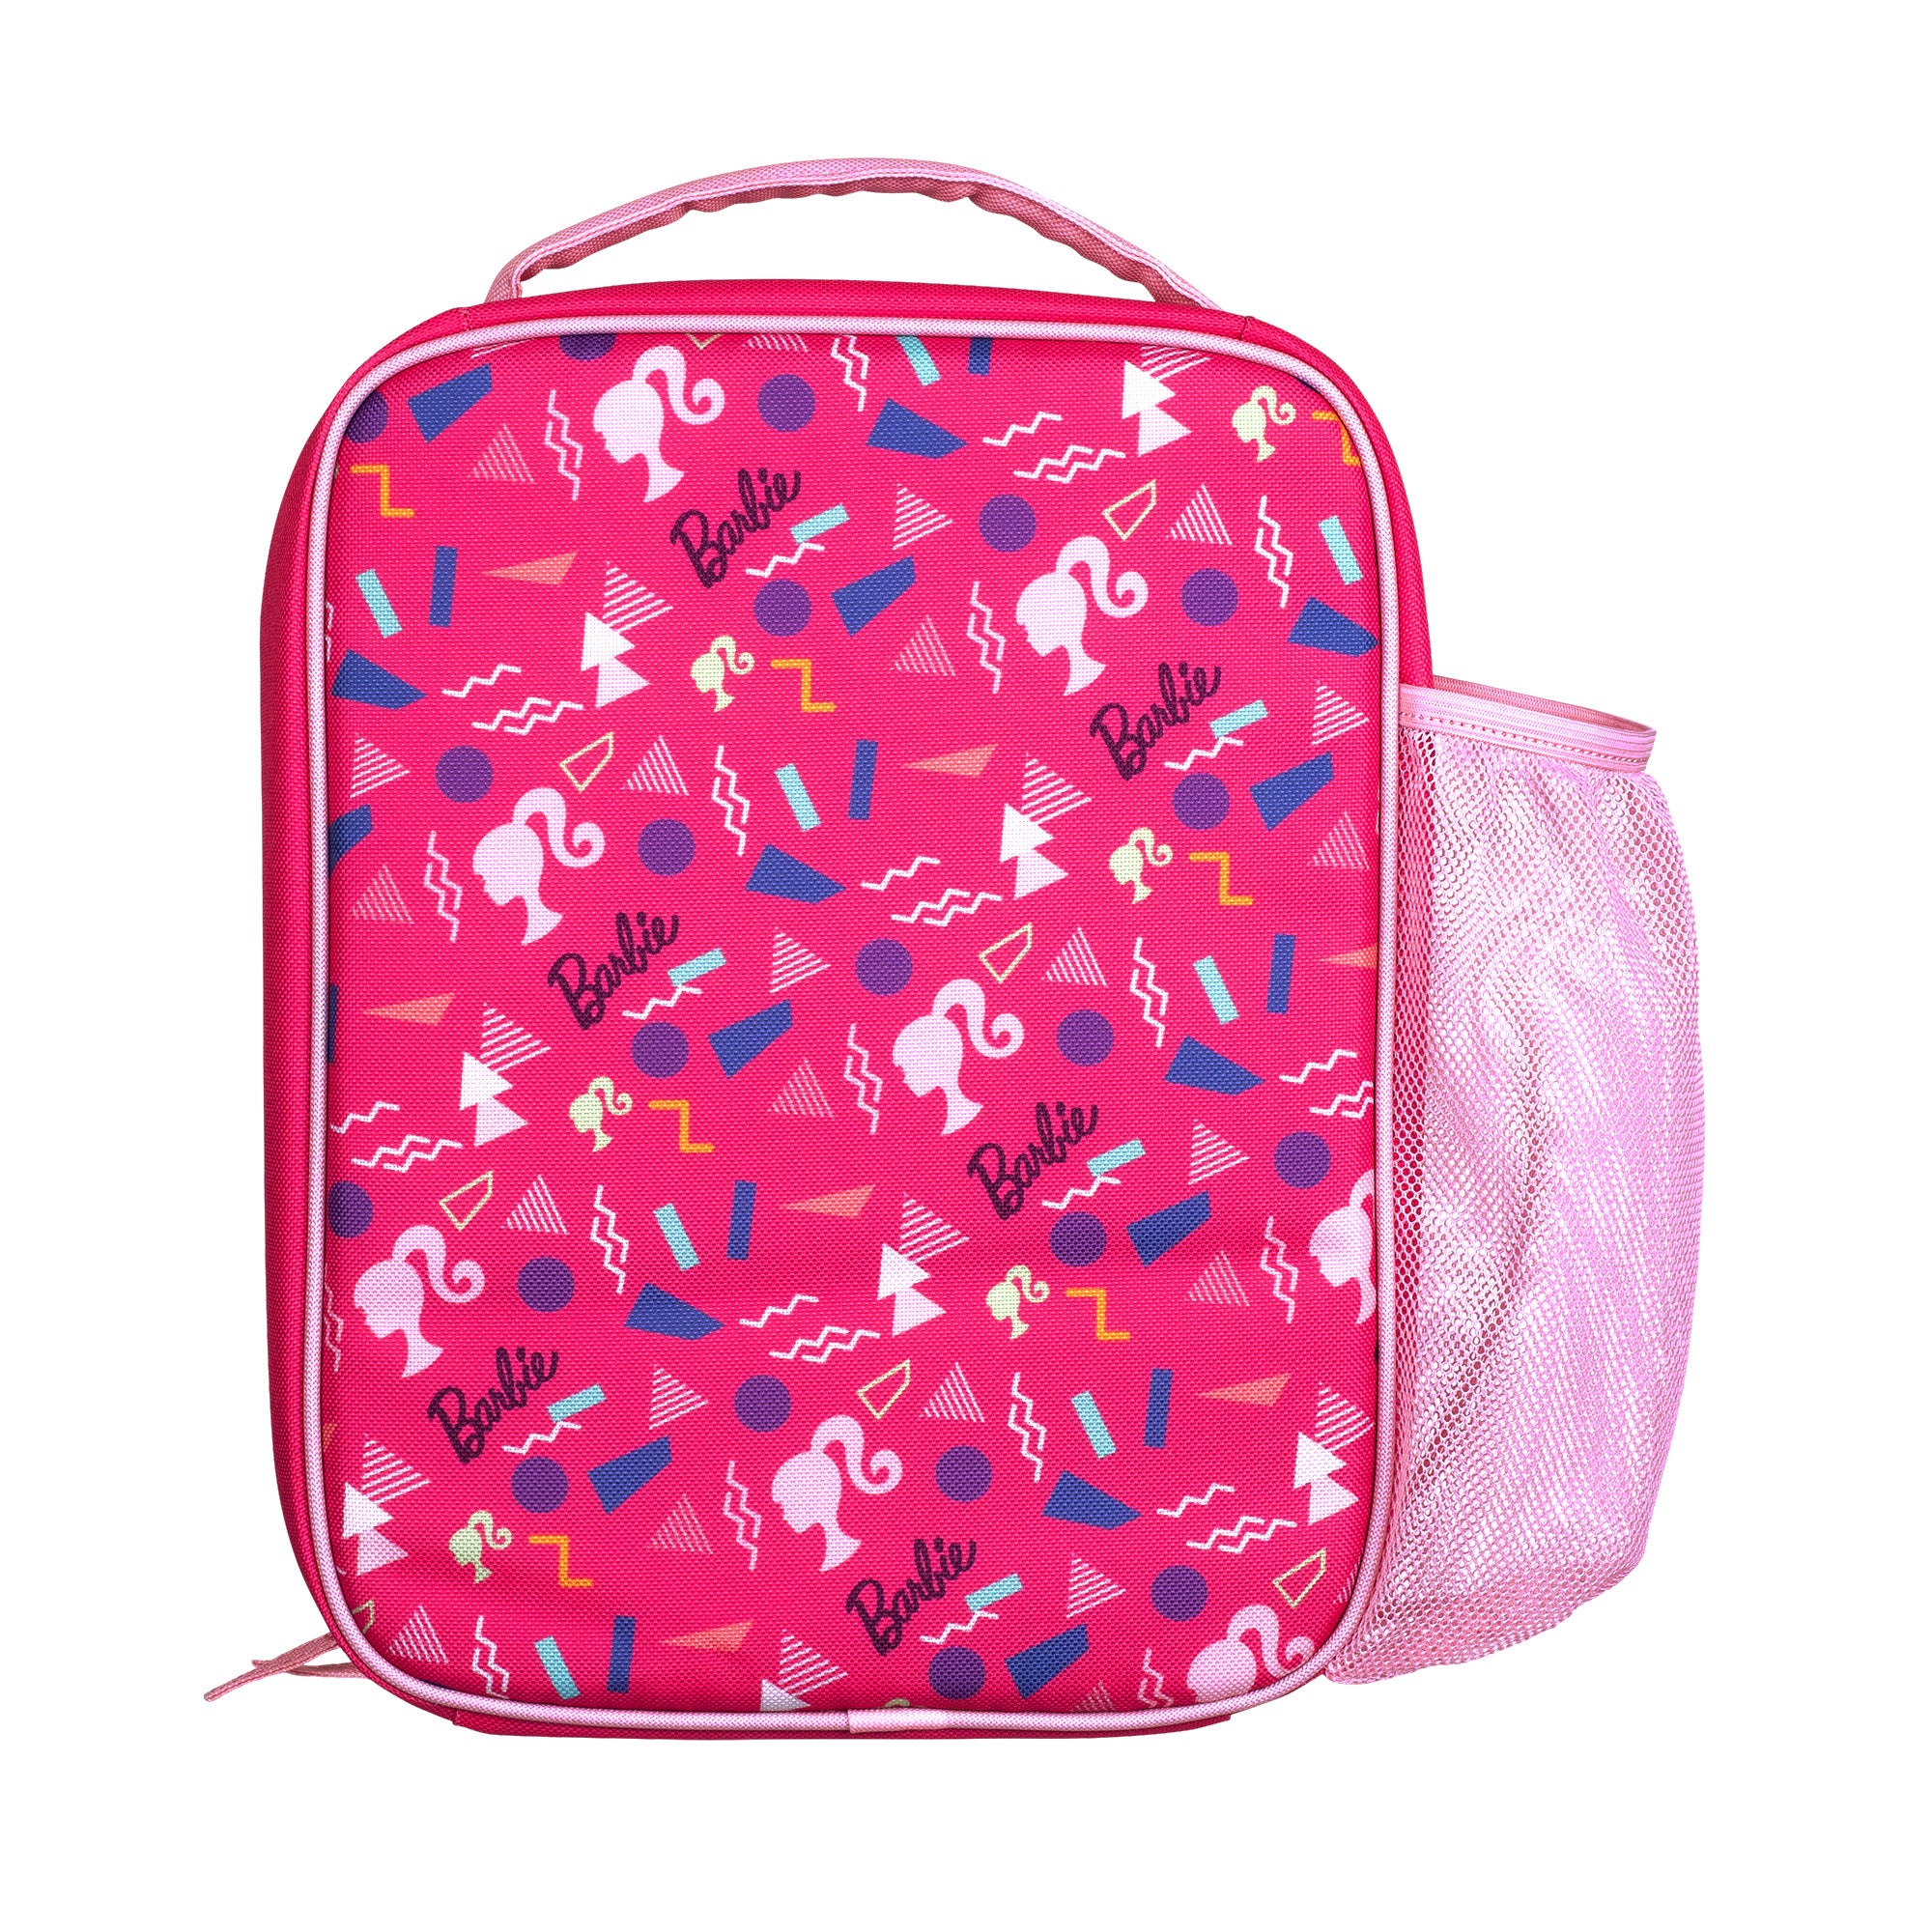 Barbie Insulated Lunch Bag